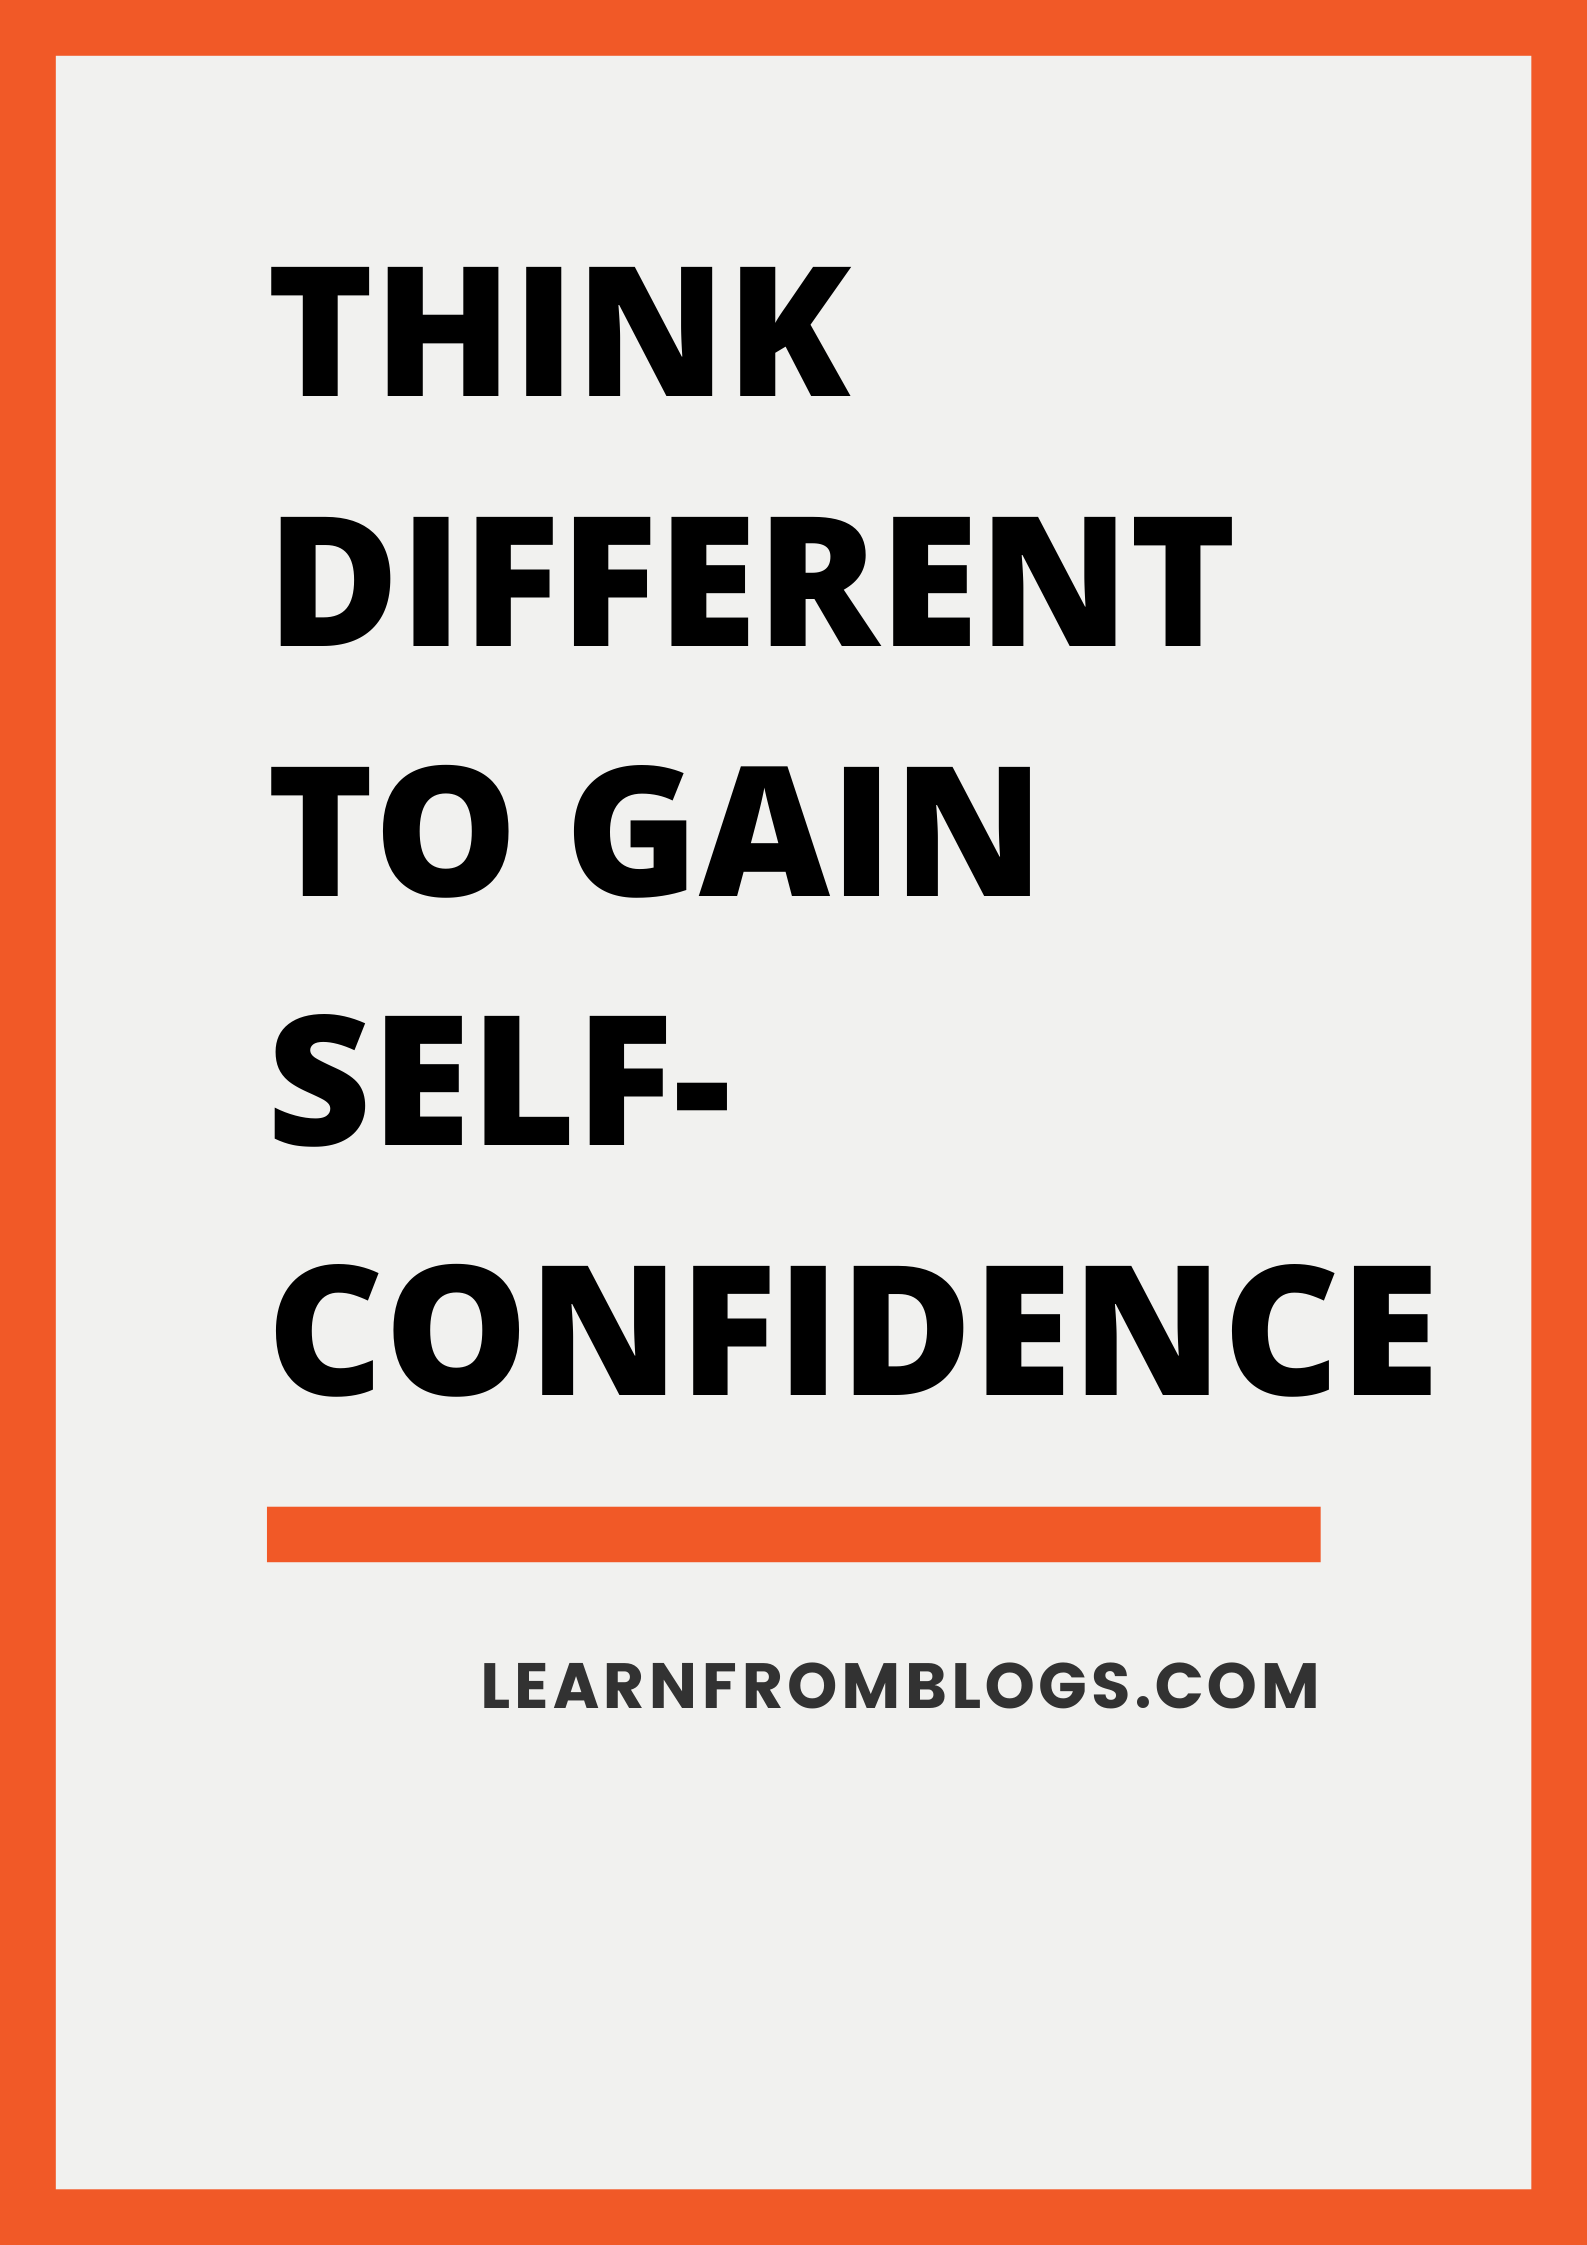 THINK DIFFERENT TO GAIN SELF-CONFIDENCE.png